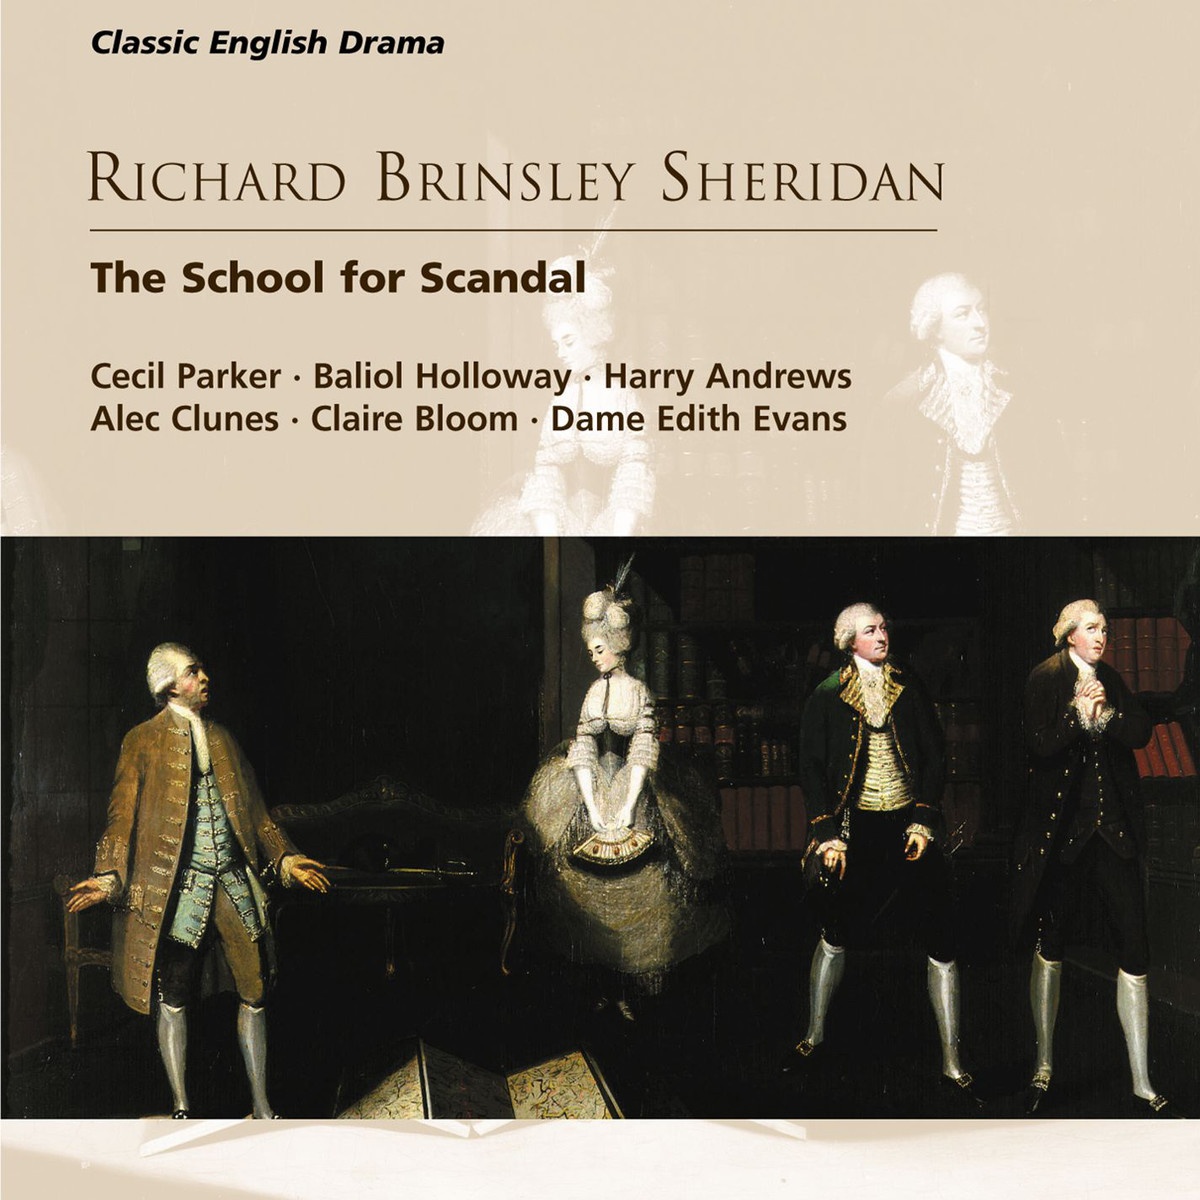 The School for Scandal - A comedy in five acts, Act III, Scene 1 (At Sir Peter's): Lud, Sir Peter, I hope you haven't been quarr